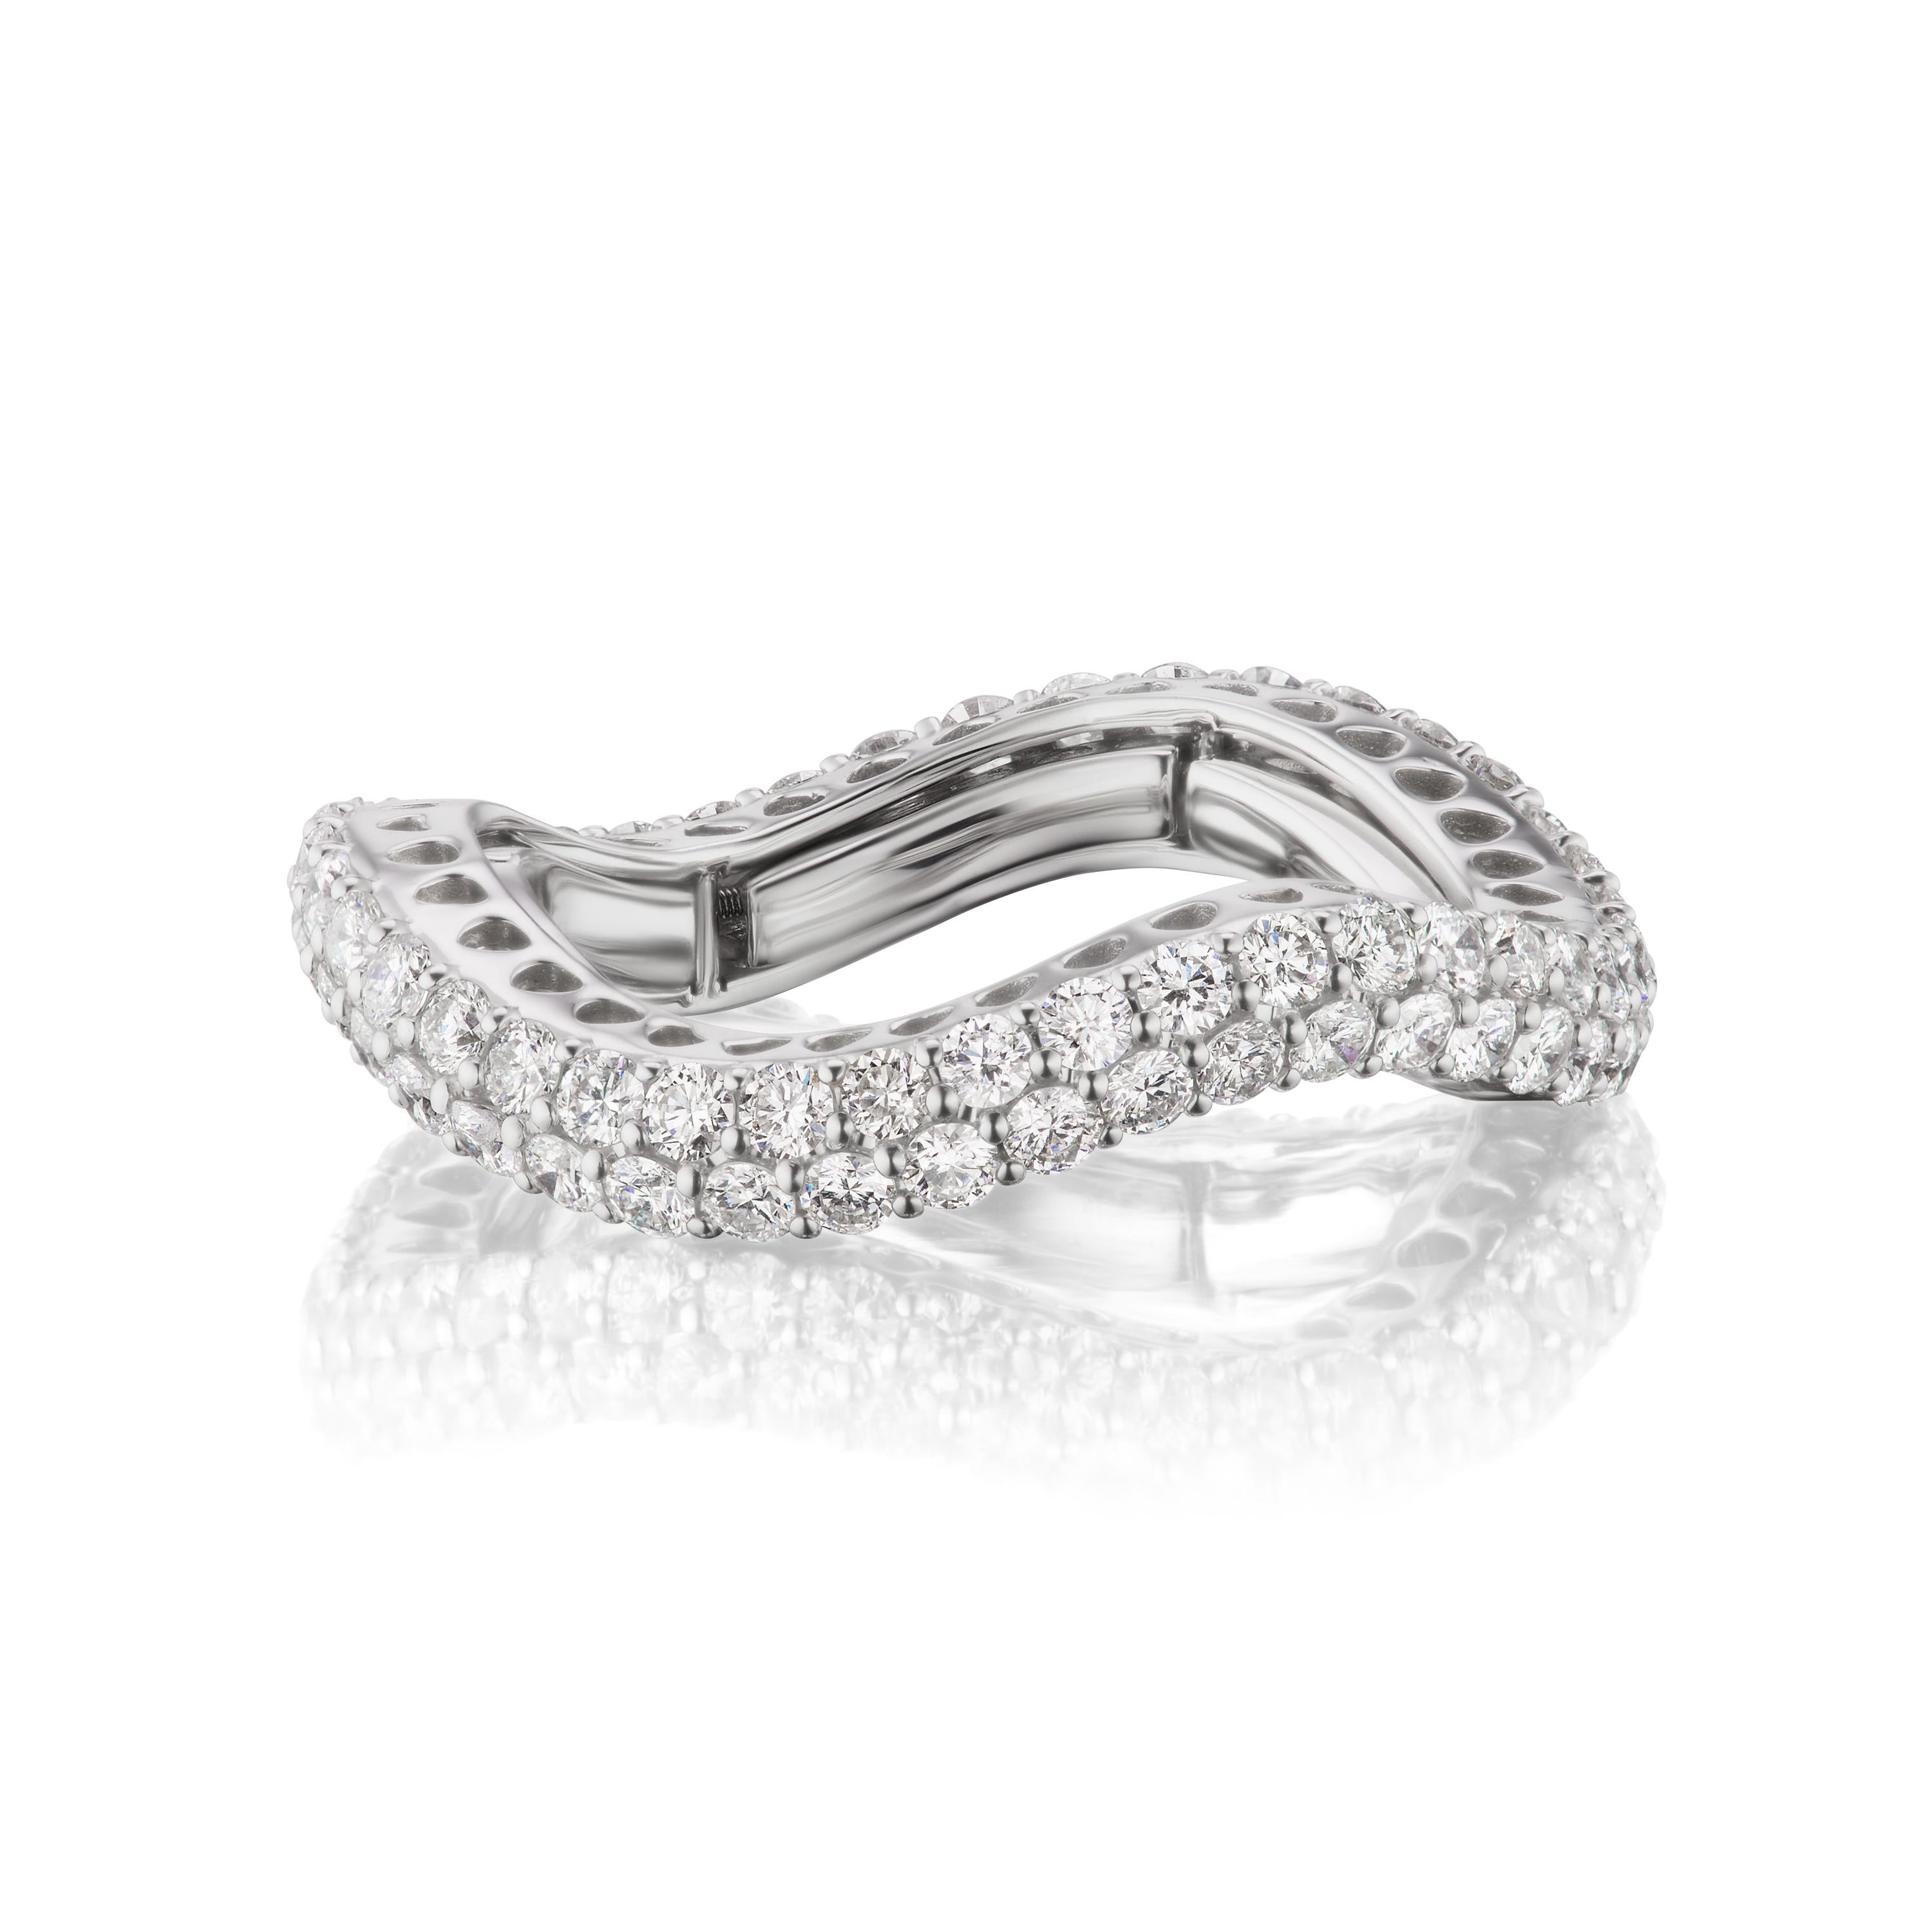 This Luxle ring is adorned with sparkling round cut diamonds embellished in a swirl design. Each band ring is made with 82 round cut diamonds. This ring is adjustable and gives you the ability to wear in any finger. It is a stretchable ring and it